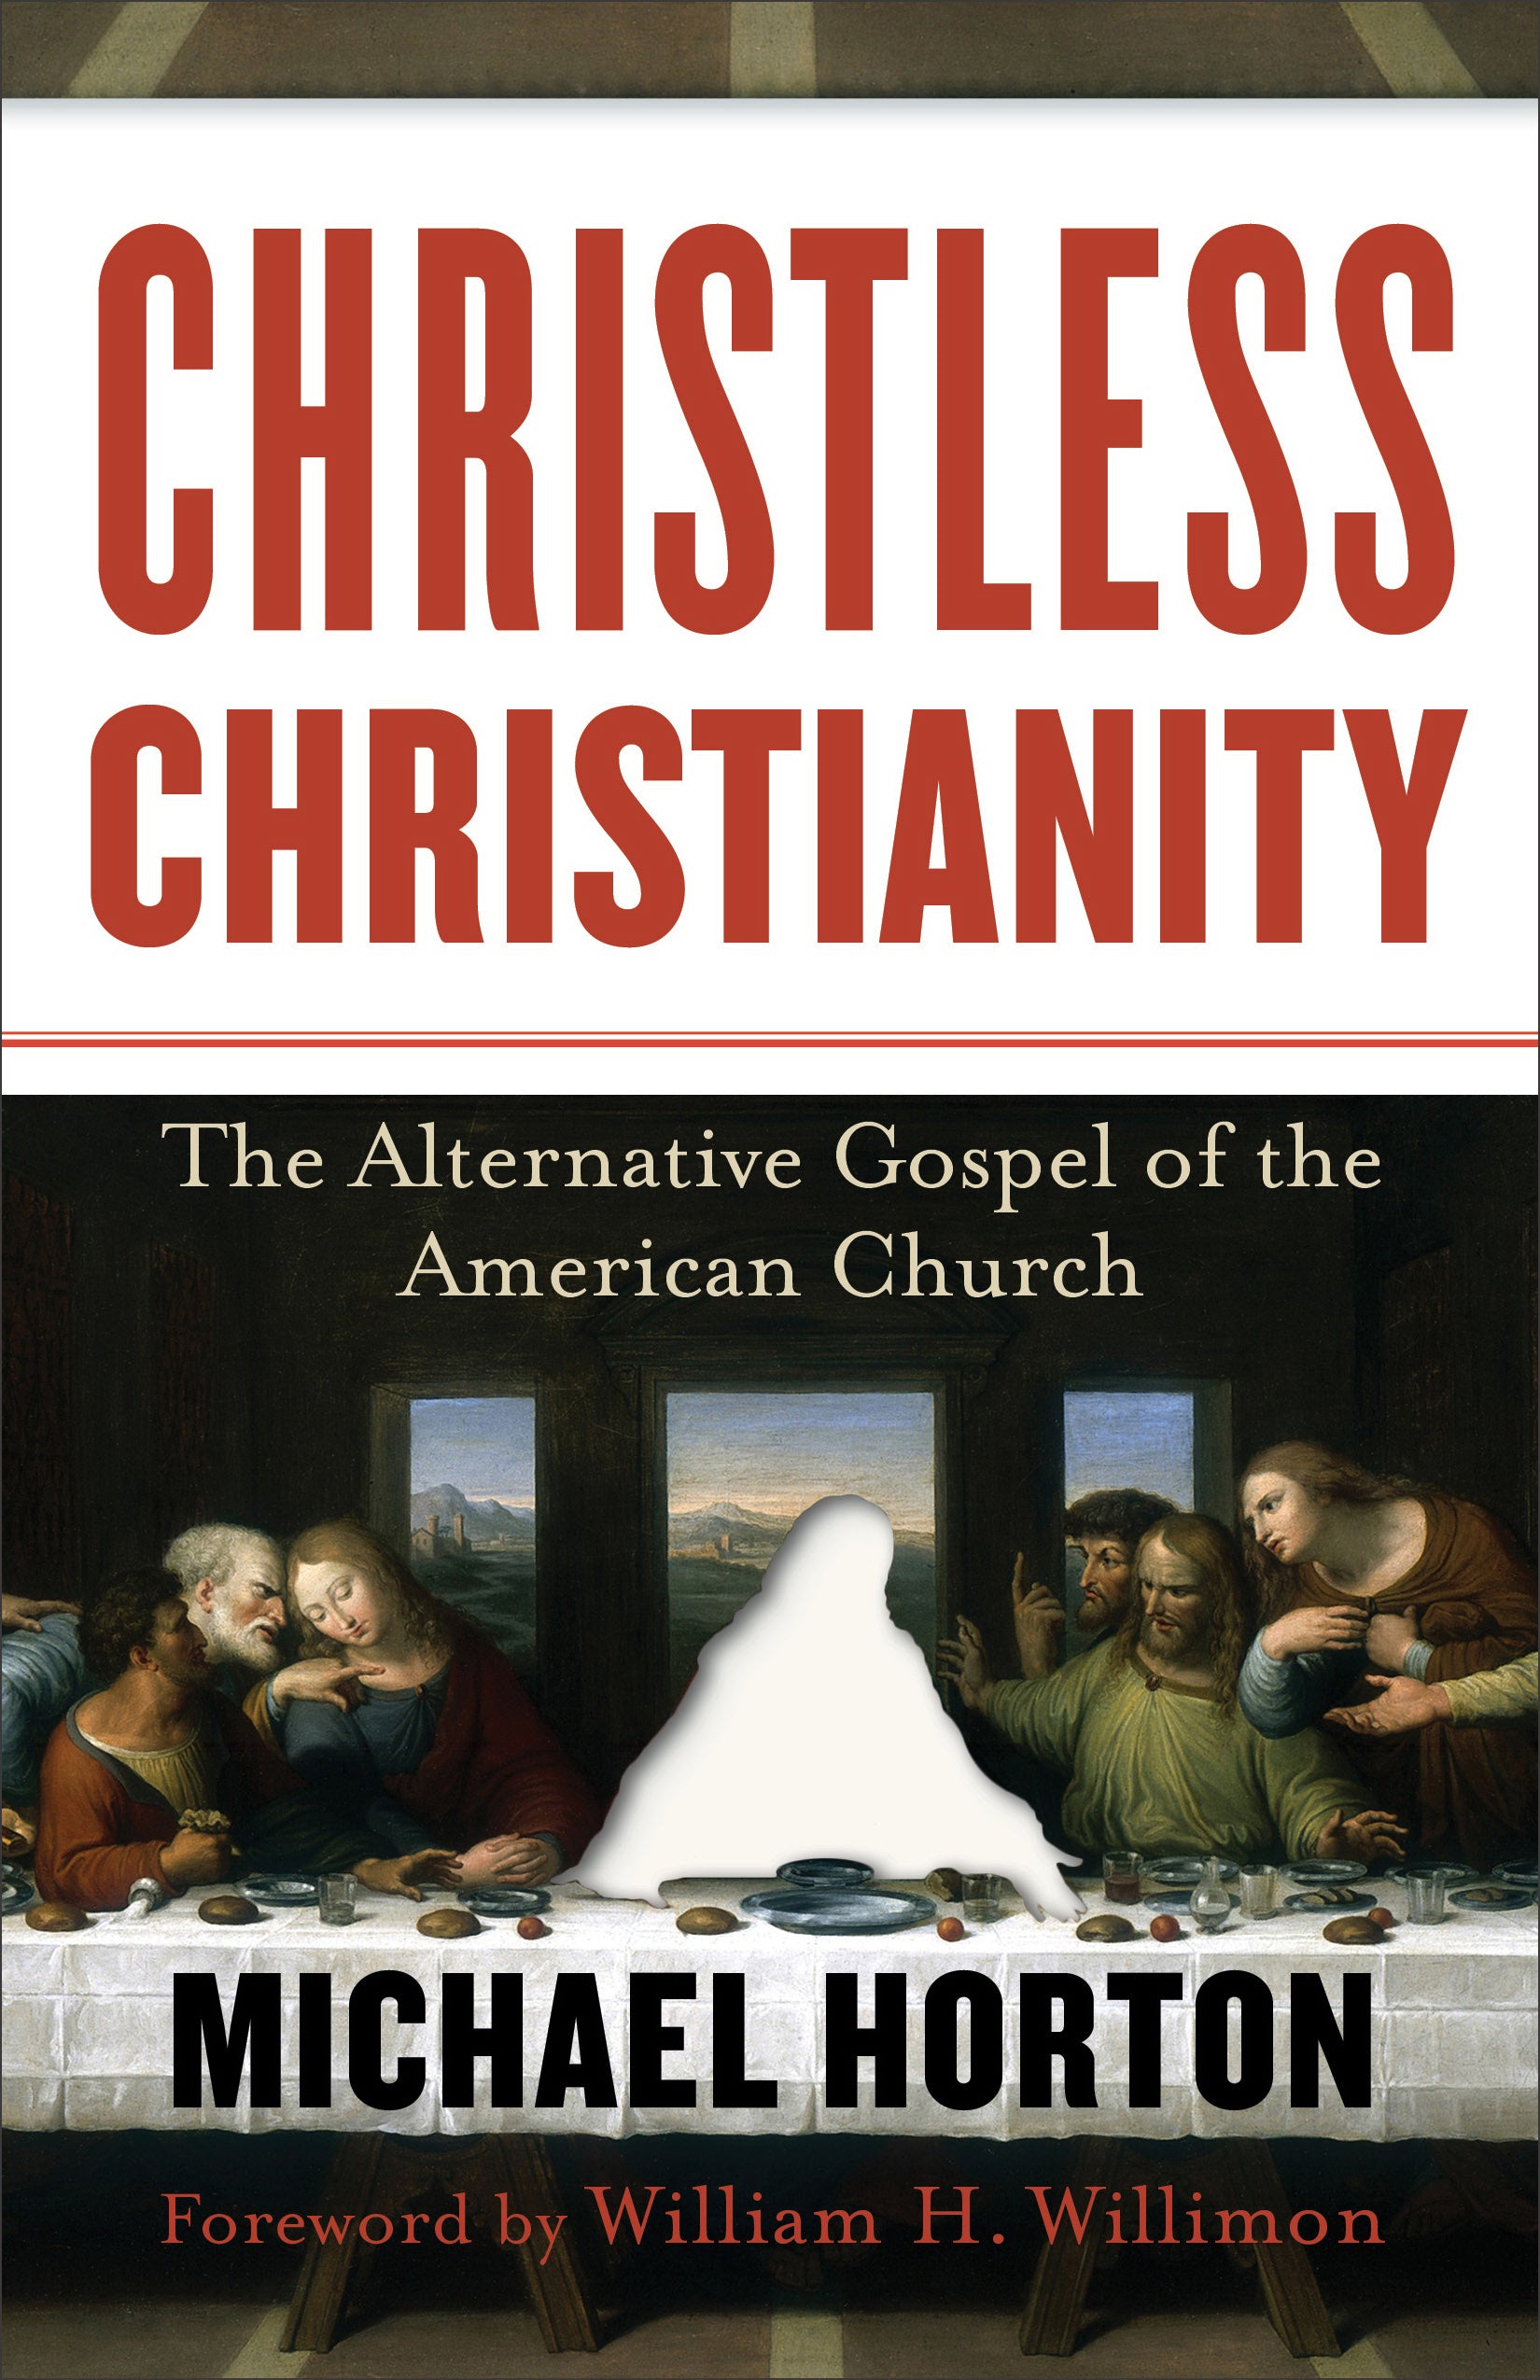 Image of Christless Christianity other